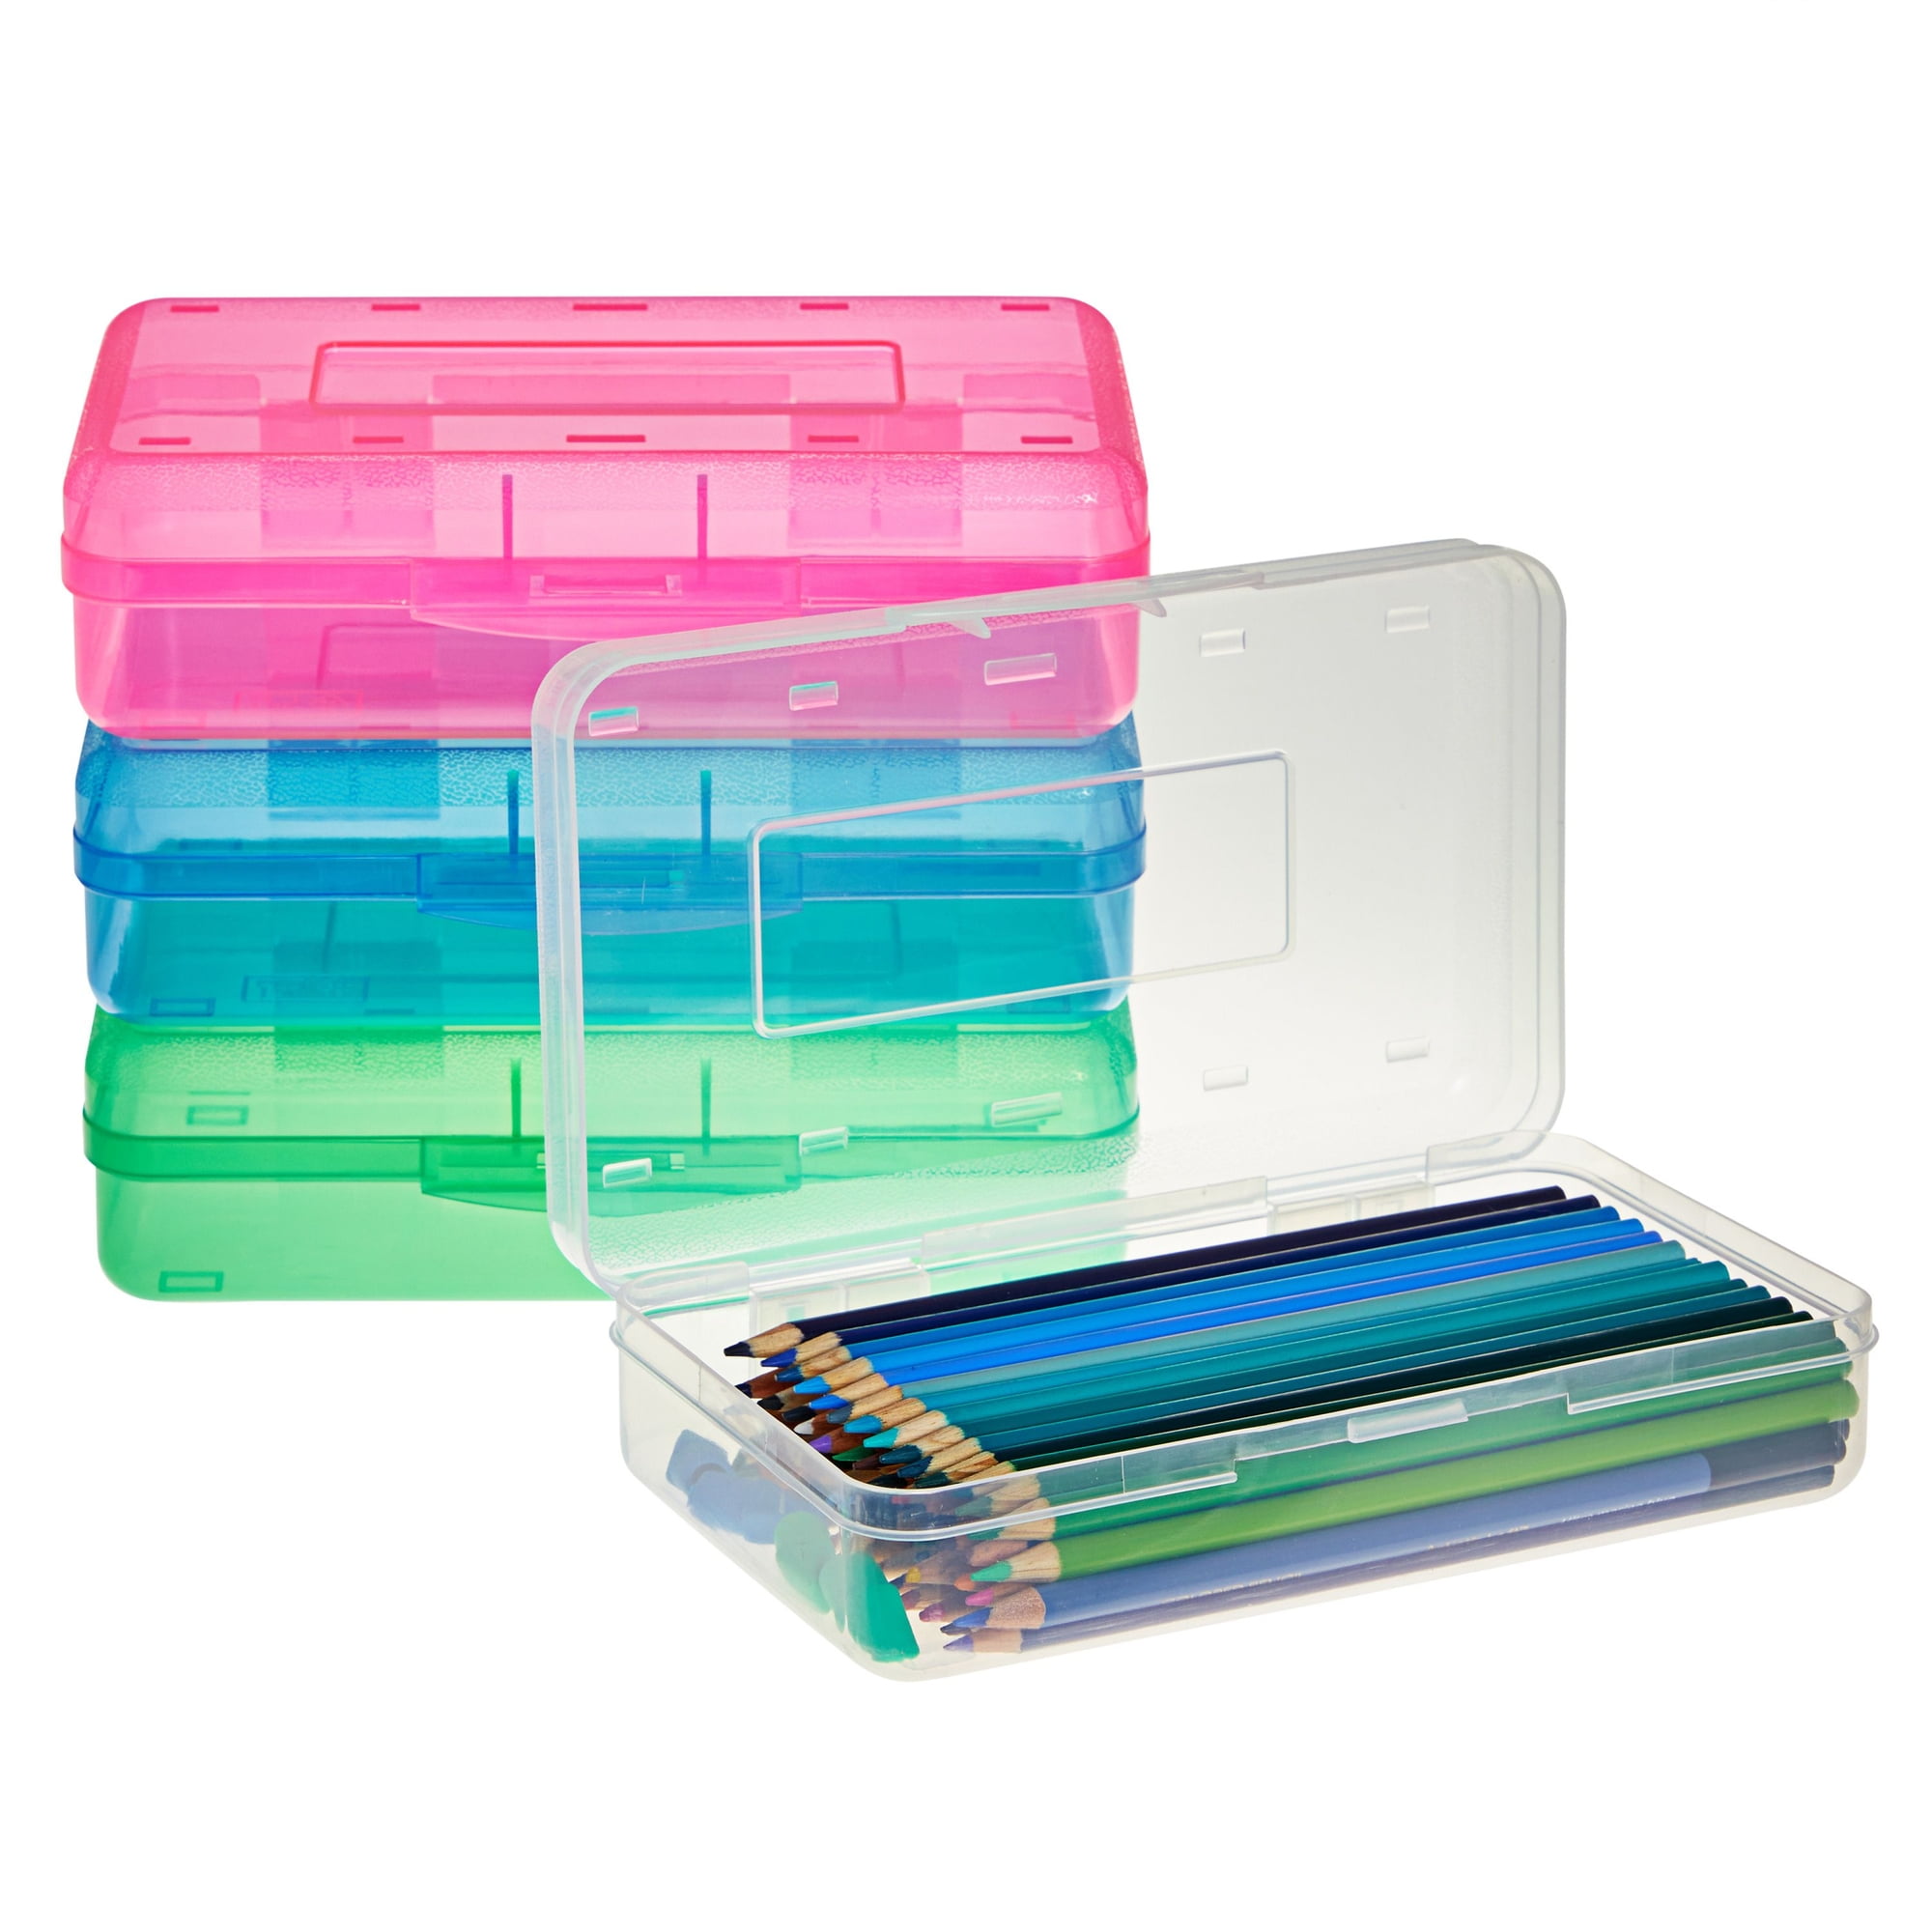 4-Pack Large Capacity Plastic Pencil Boxes for Student School Pens,  Markers, Crayons, Colorful Clear Stackable Cases for Office Supplies,  Storage Organizer (8.1x4.8x2.4 in) 